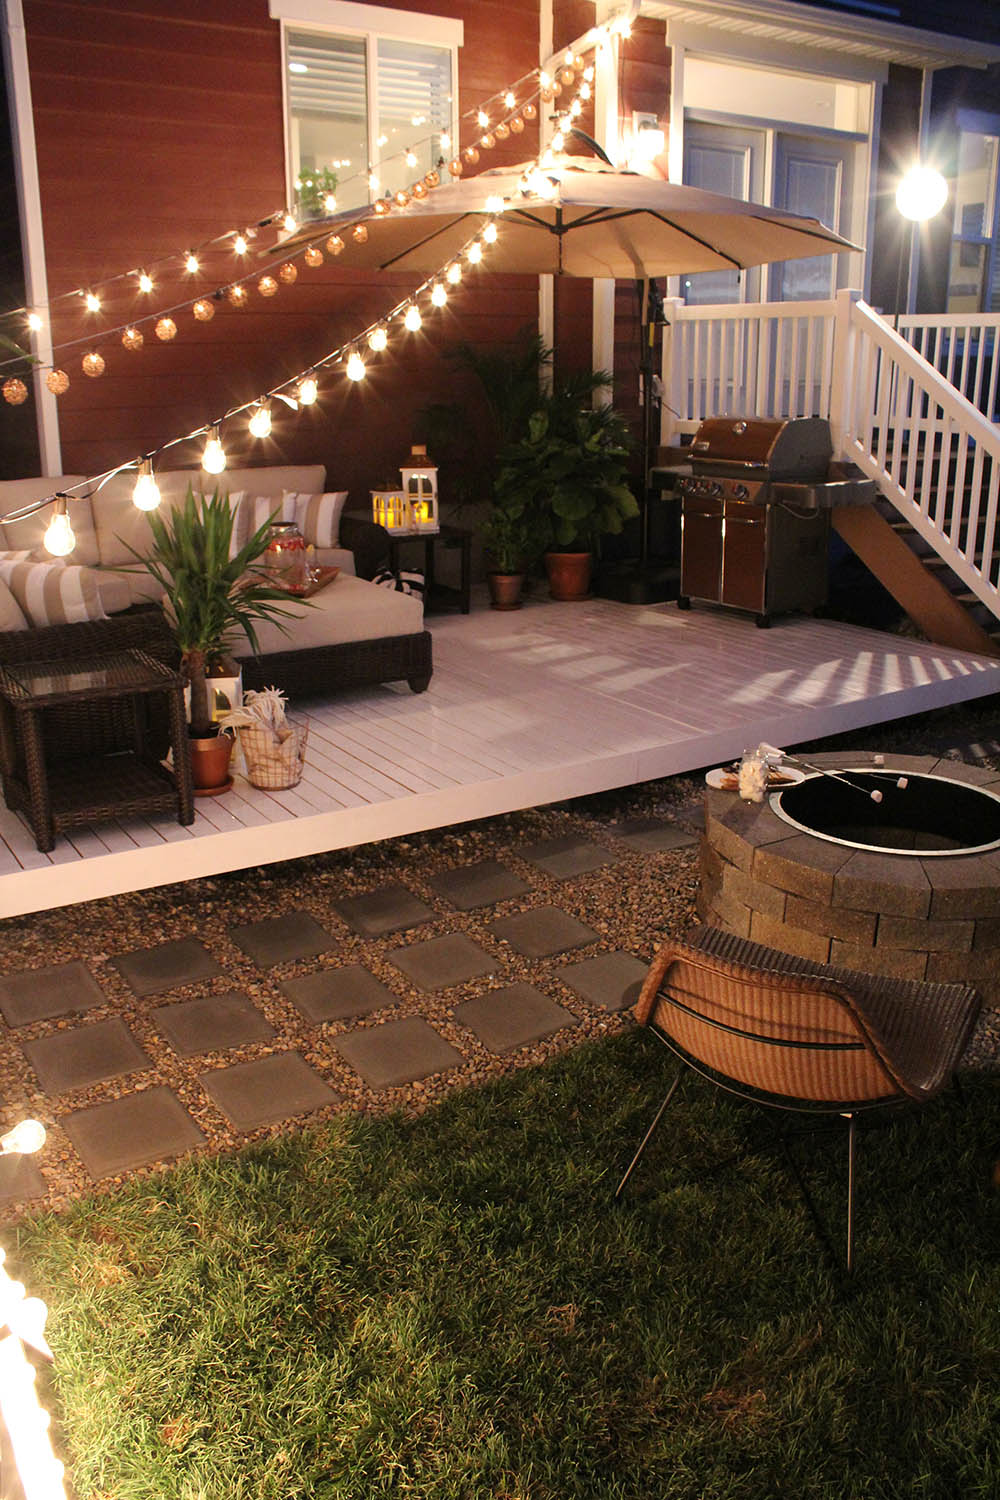 How To Build A Simple Diy Deck On Budget